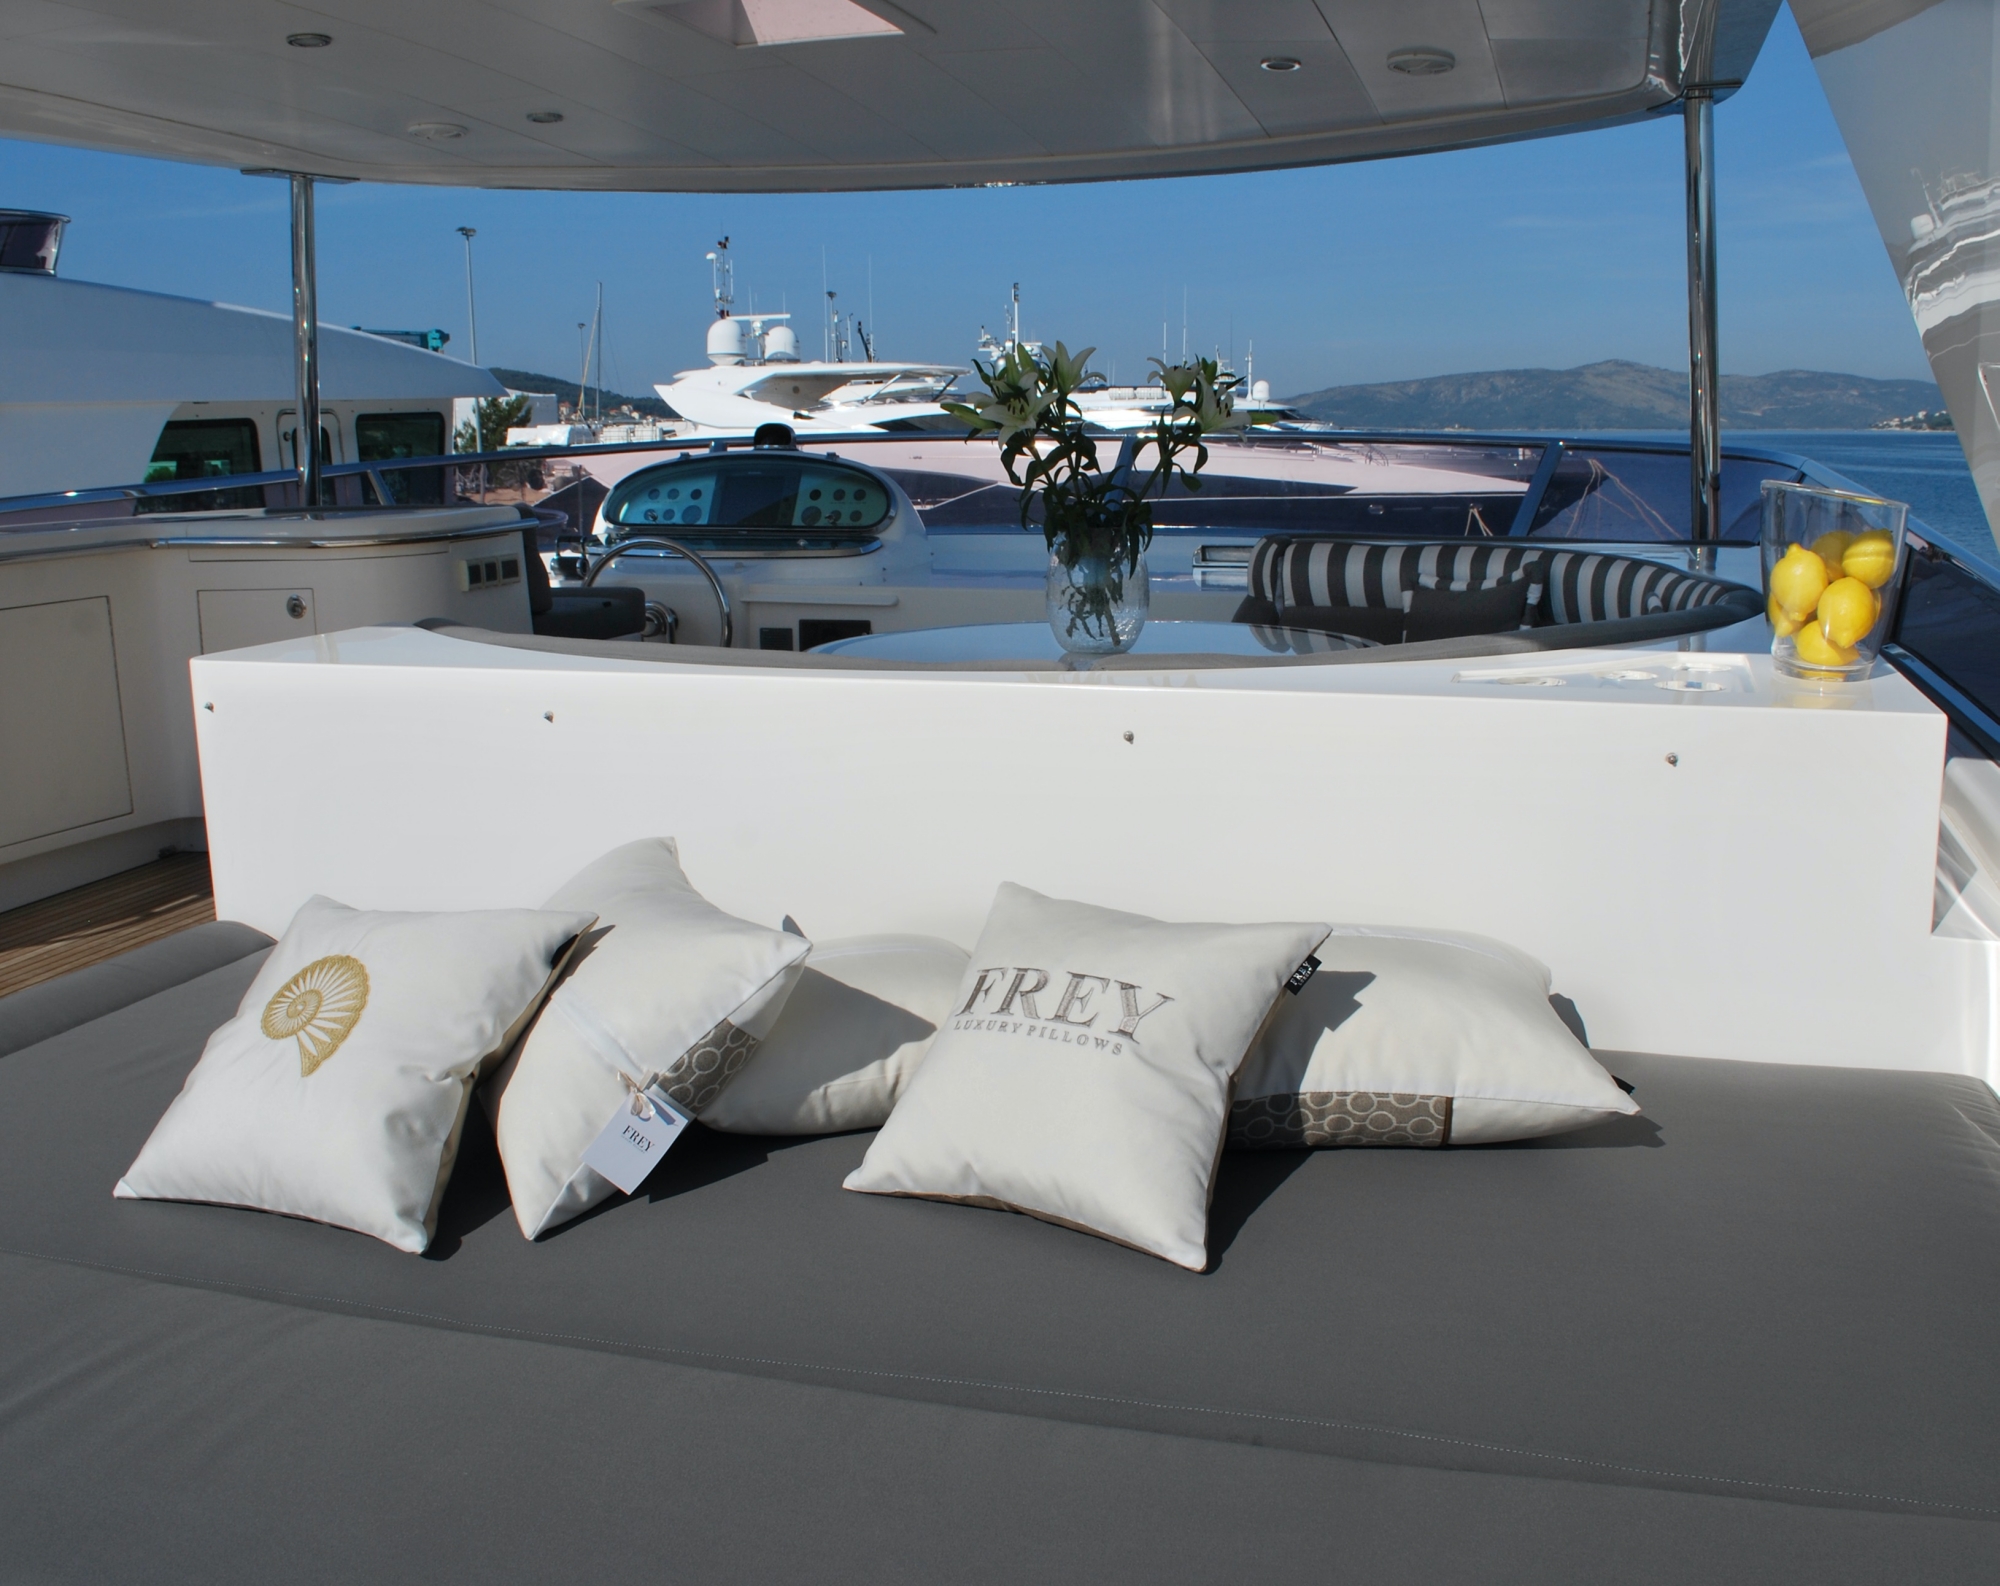 Frey soft Luxury Pillows scattered on newly reupholstered grey sun lounge cushions on the flybridge of Horizon Elegance 78ft.